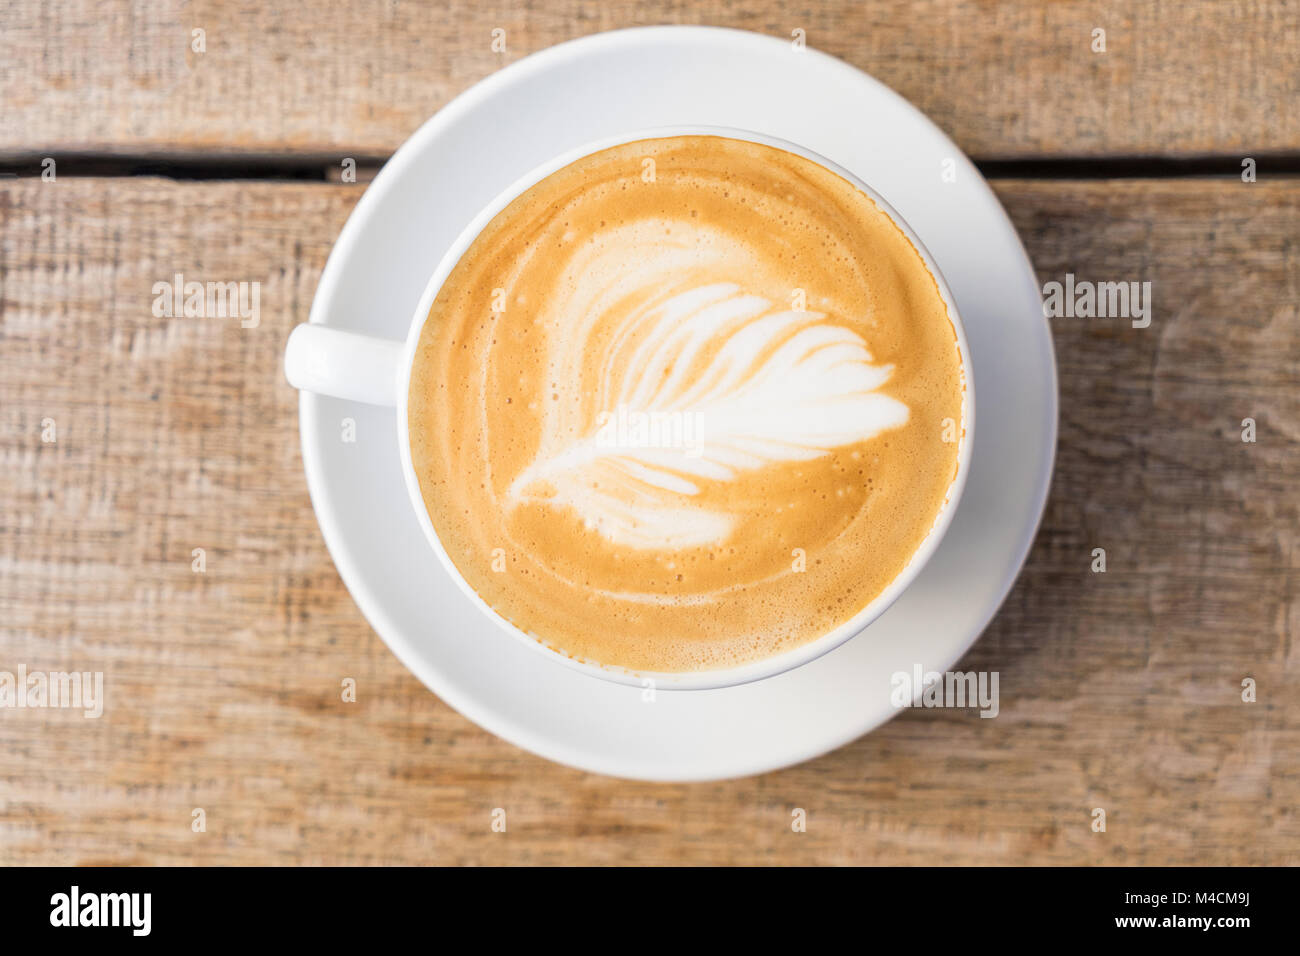 Close-up of a cup of coffee / cappuccino with foam and barista art on wooden table. Stock Photo